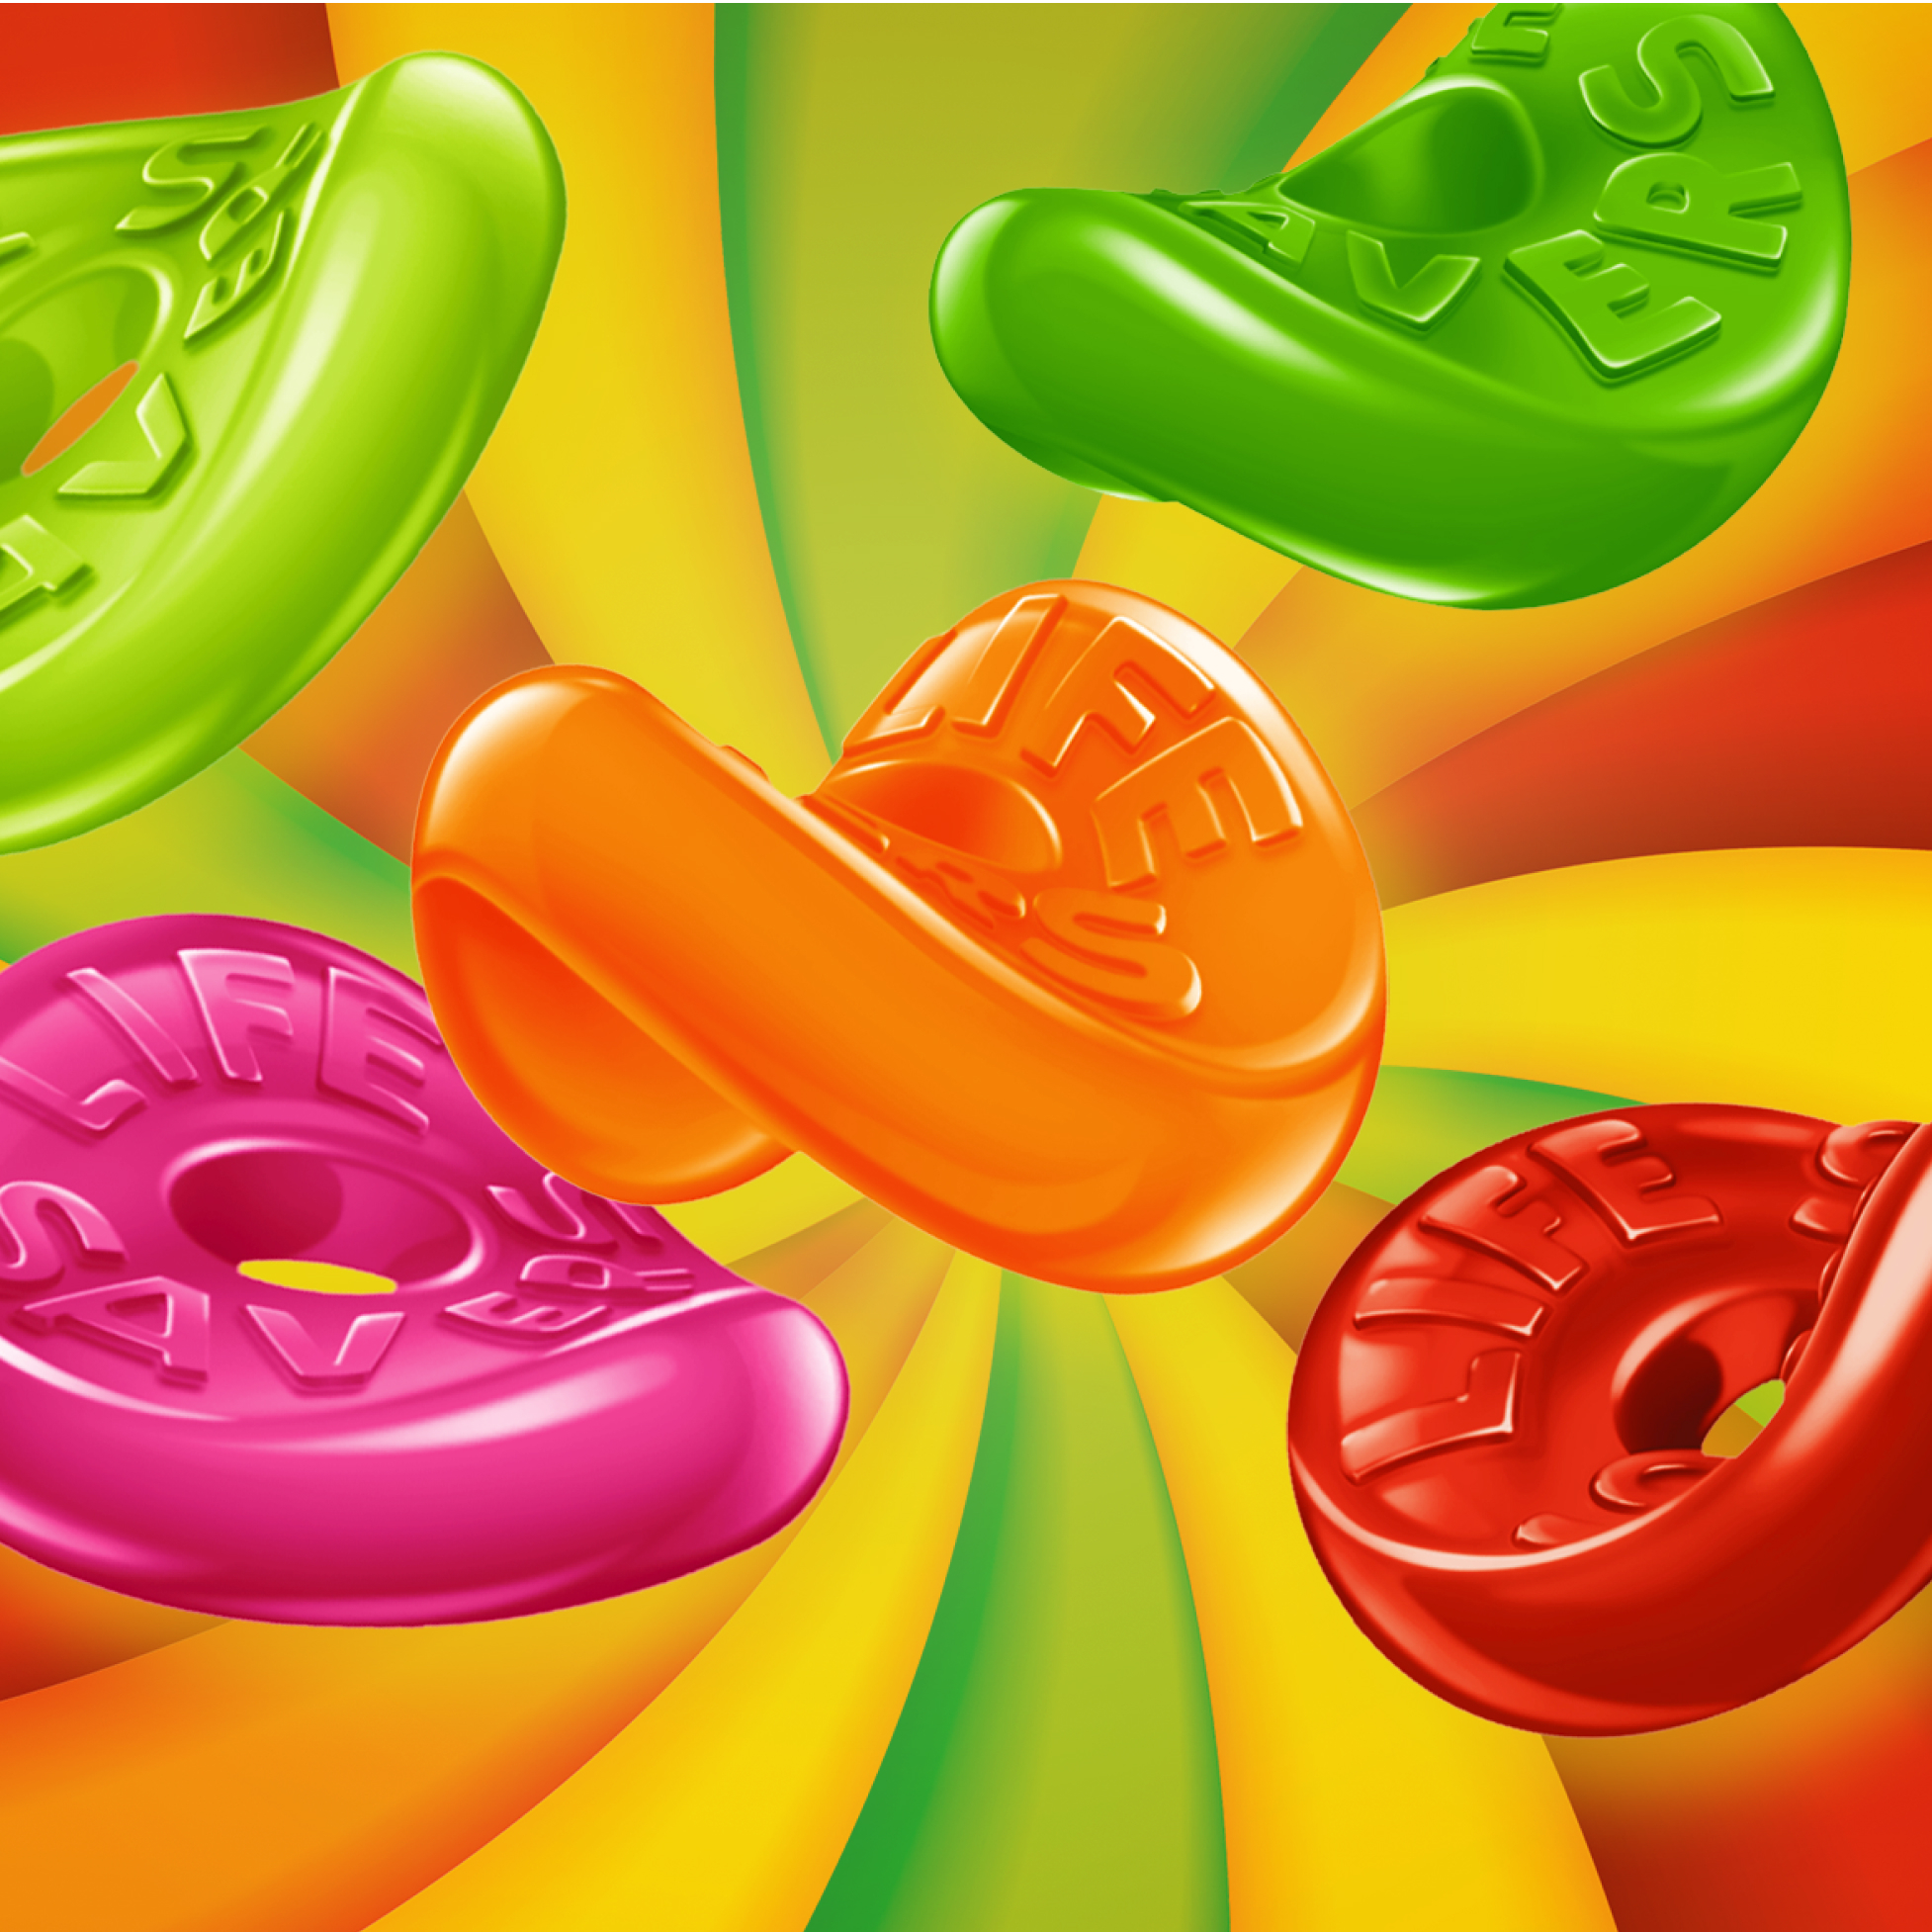 LIFE SAVERS® Candy Official Website